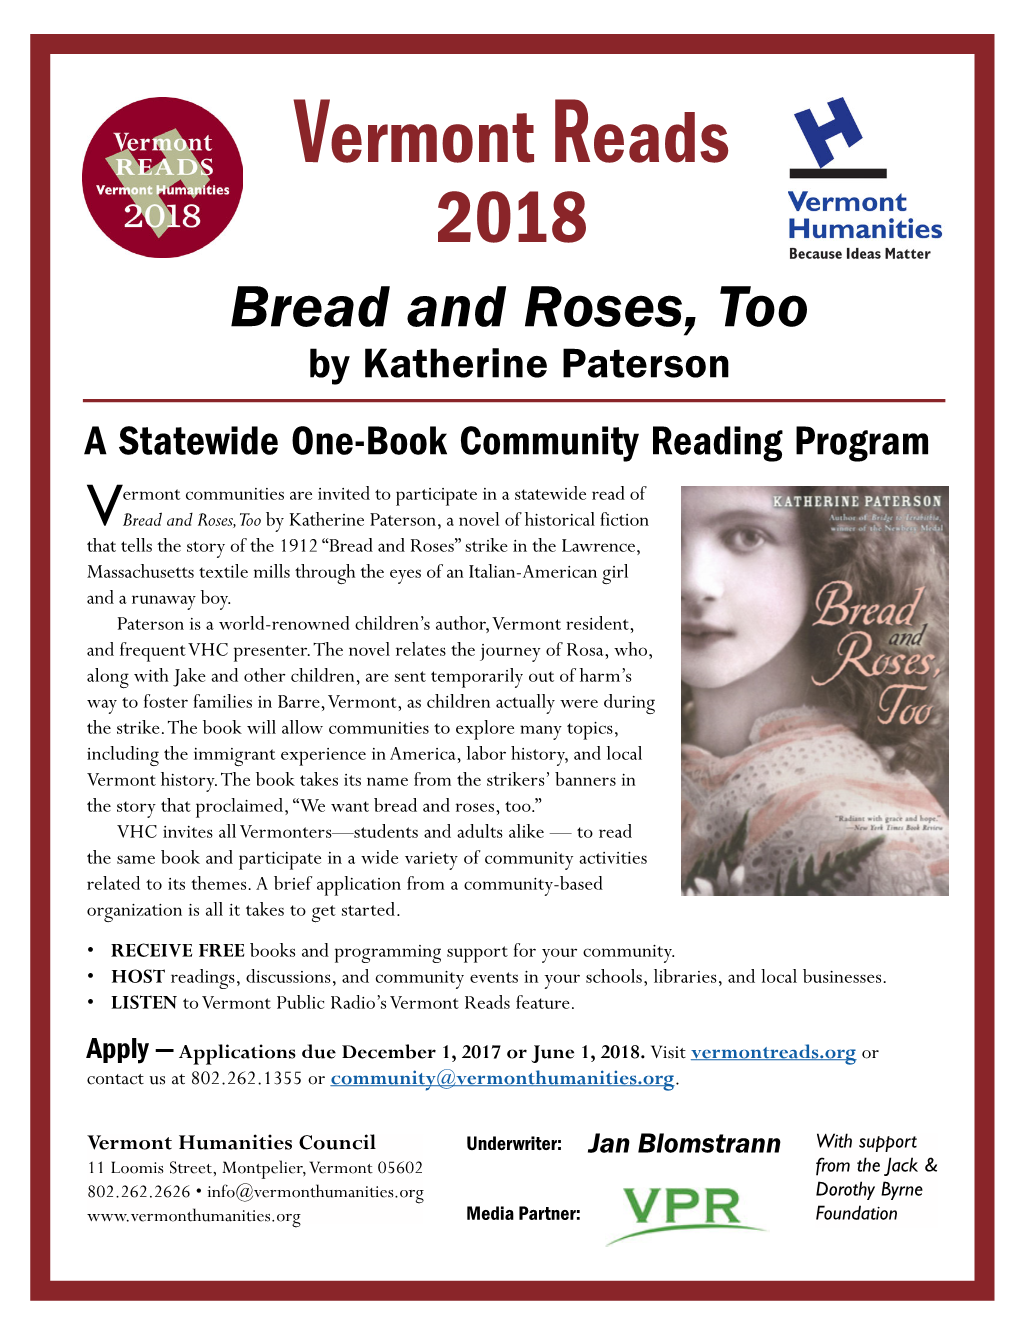 Vermont Reads 2018 Materials: Bread and Roses